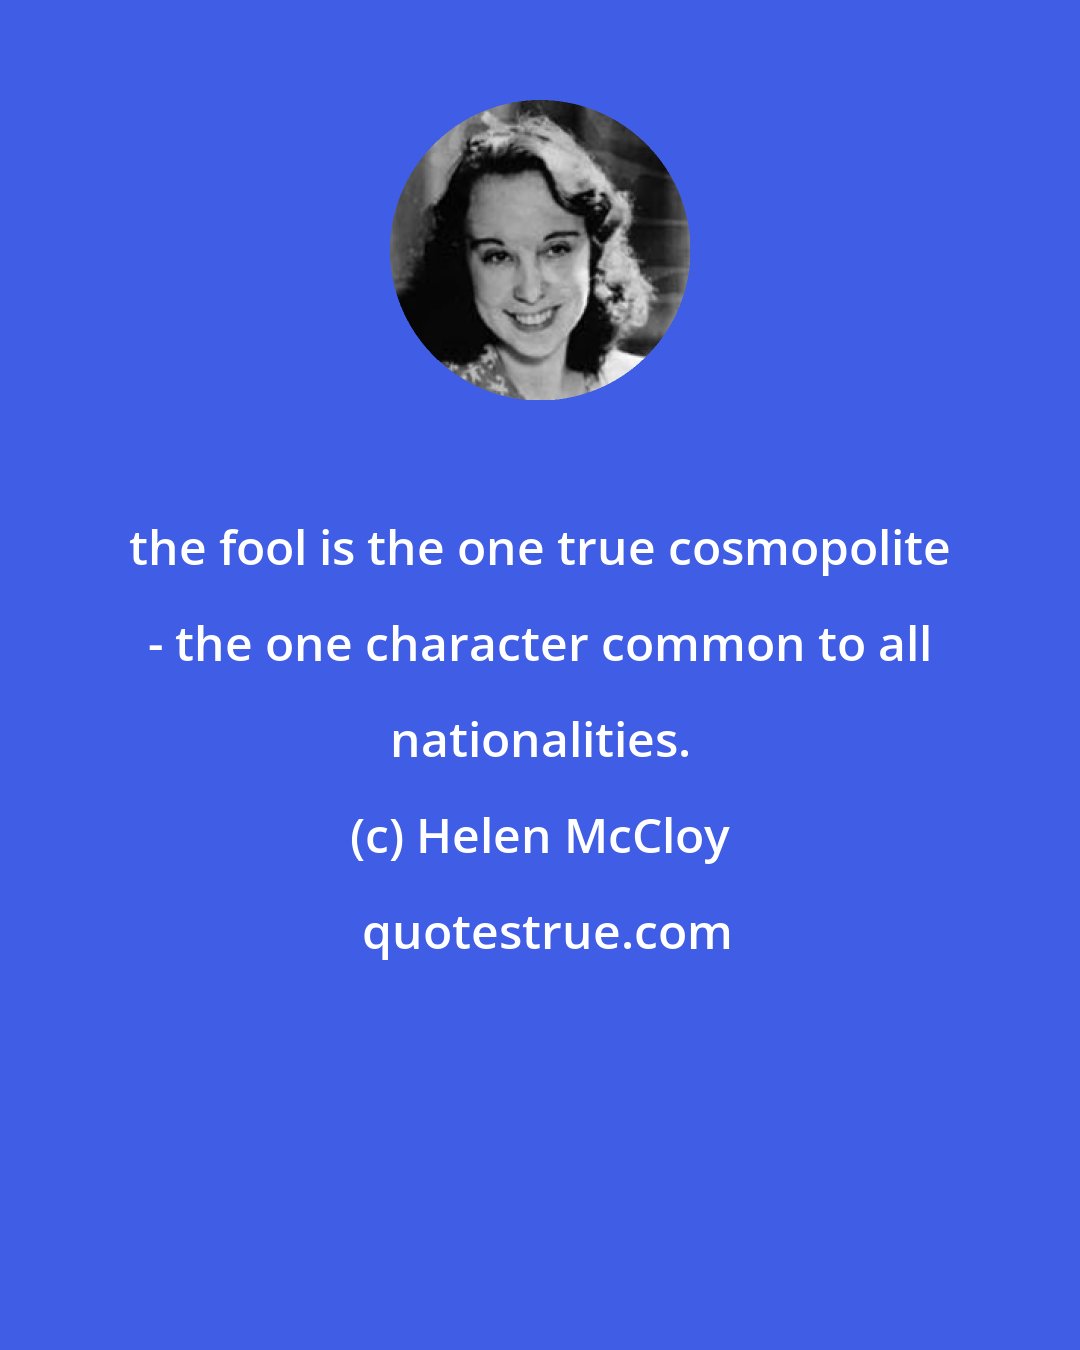 Helen McCloy: the fool is the one true cosmopolite - the one character common to all nationalities.